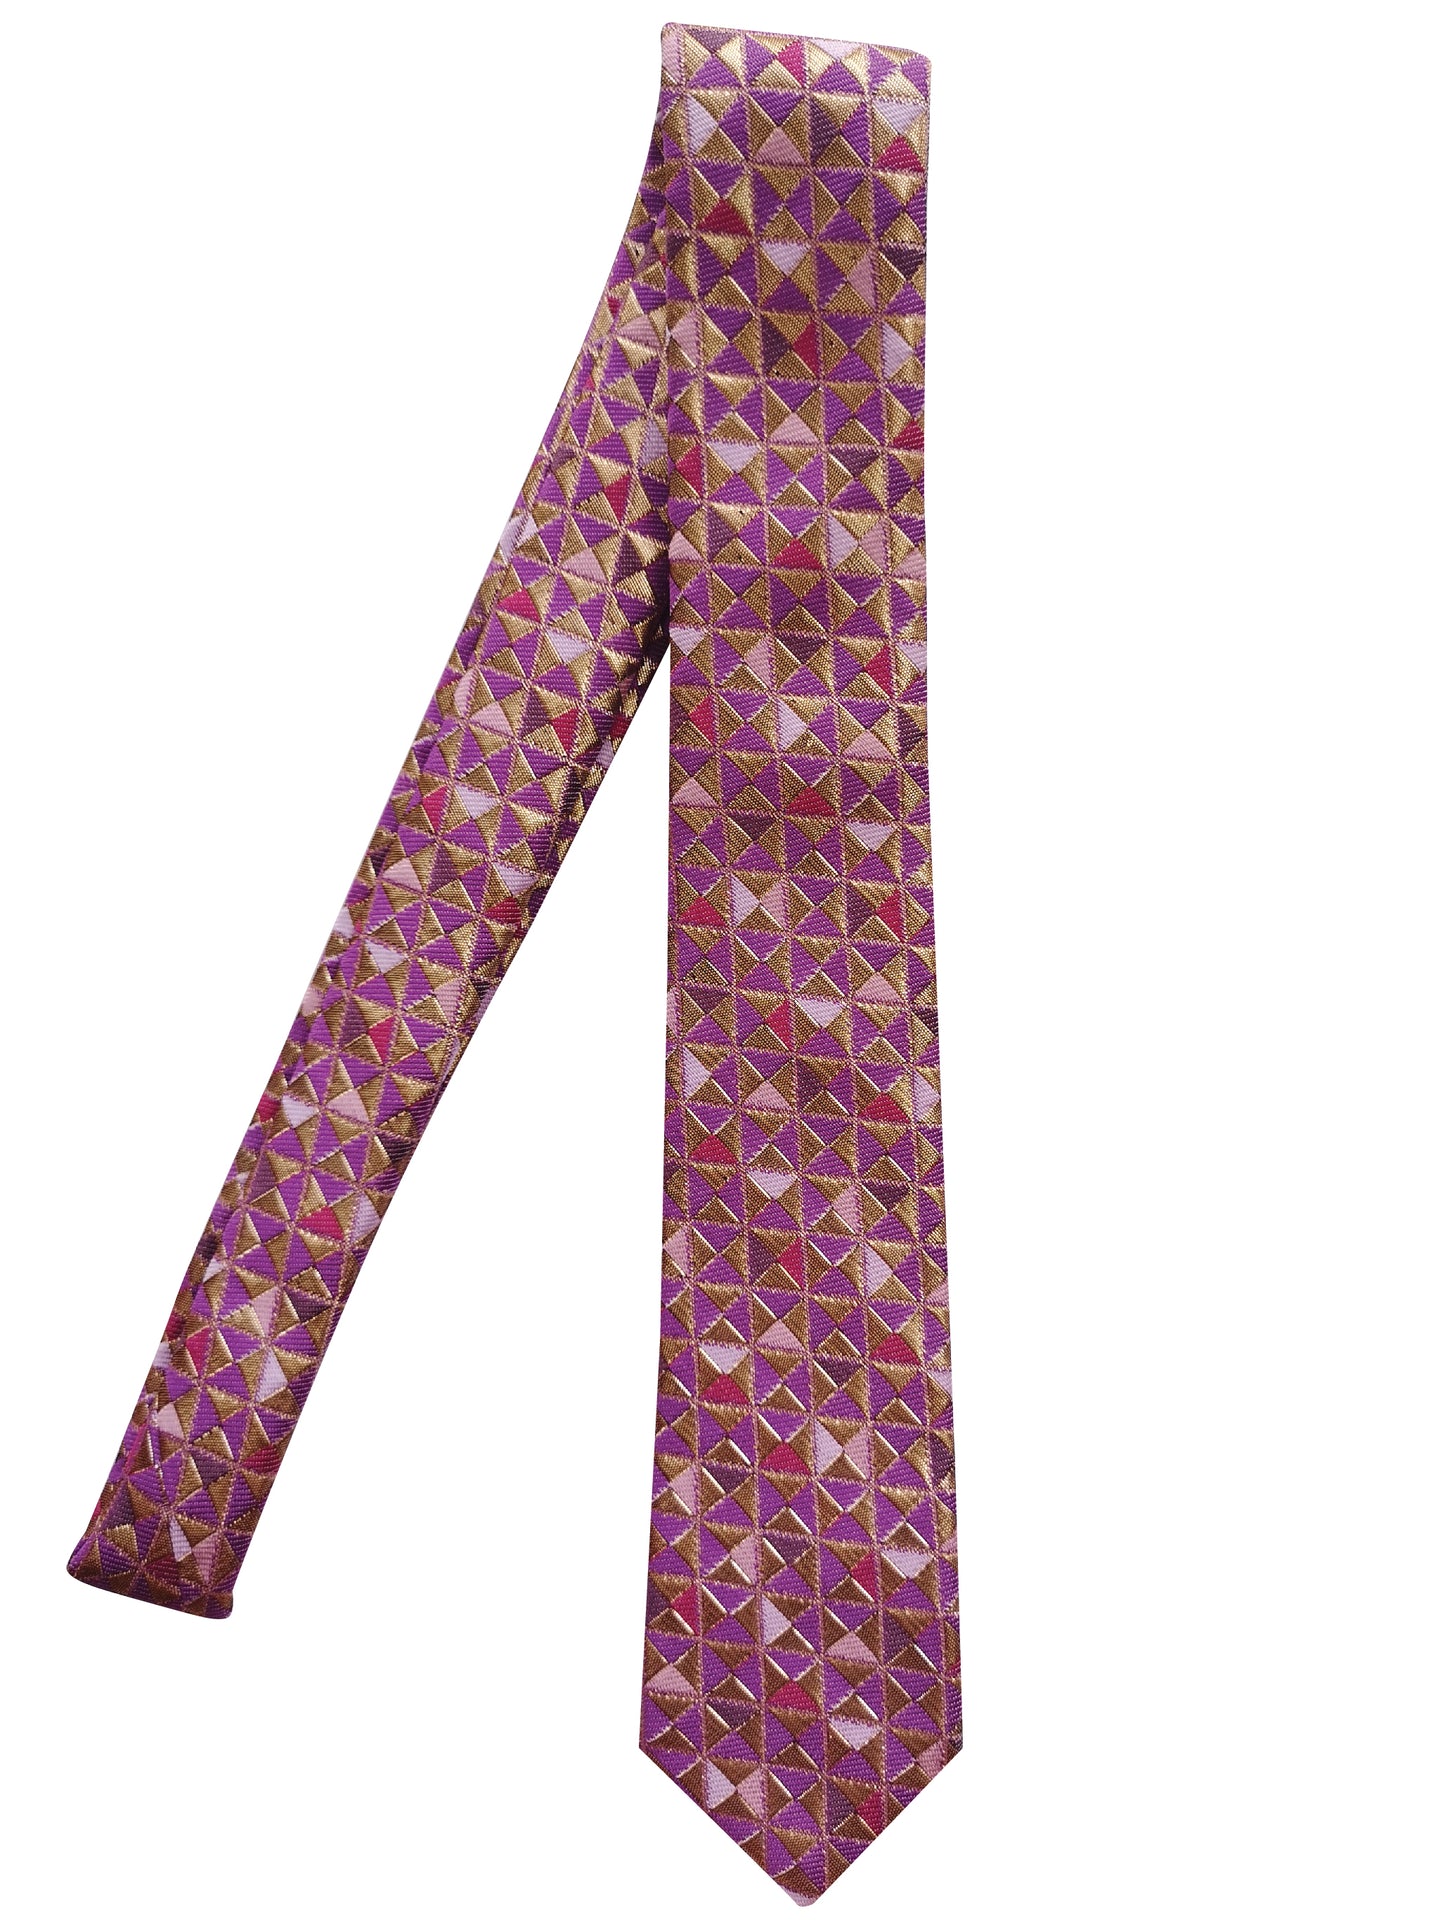 THE GIFFORD P TIE